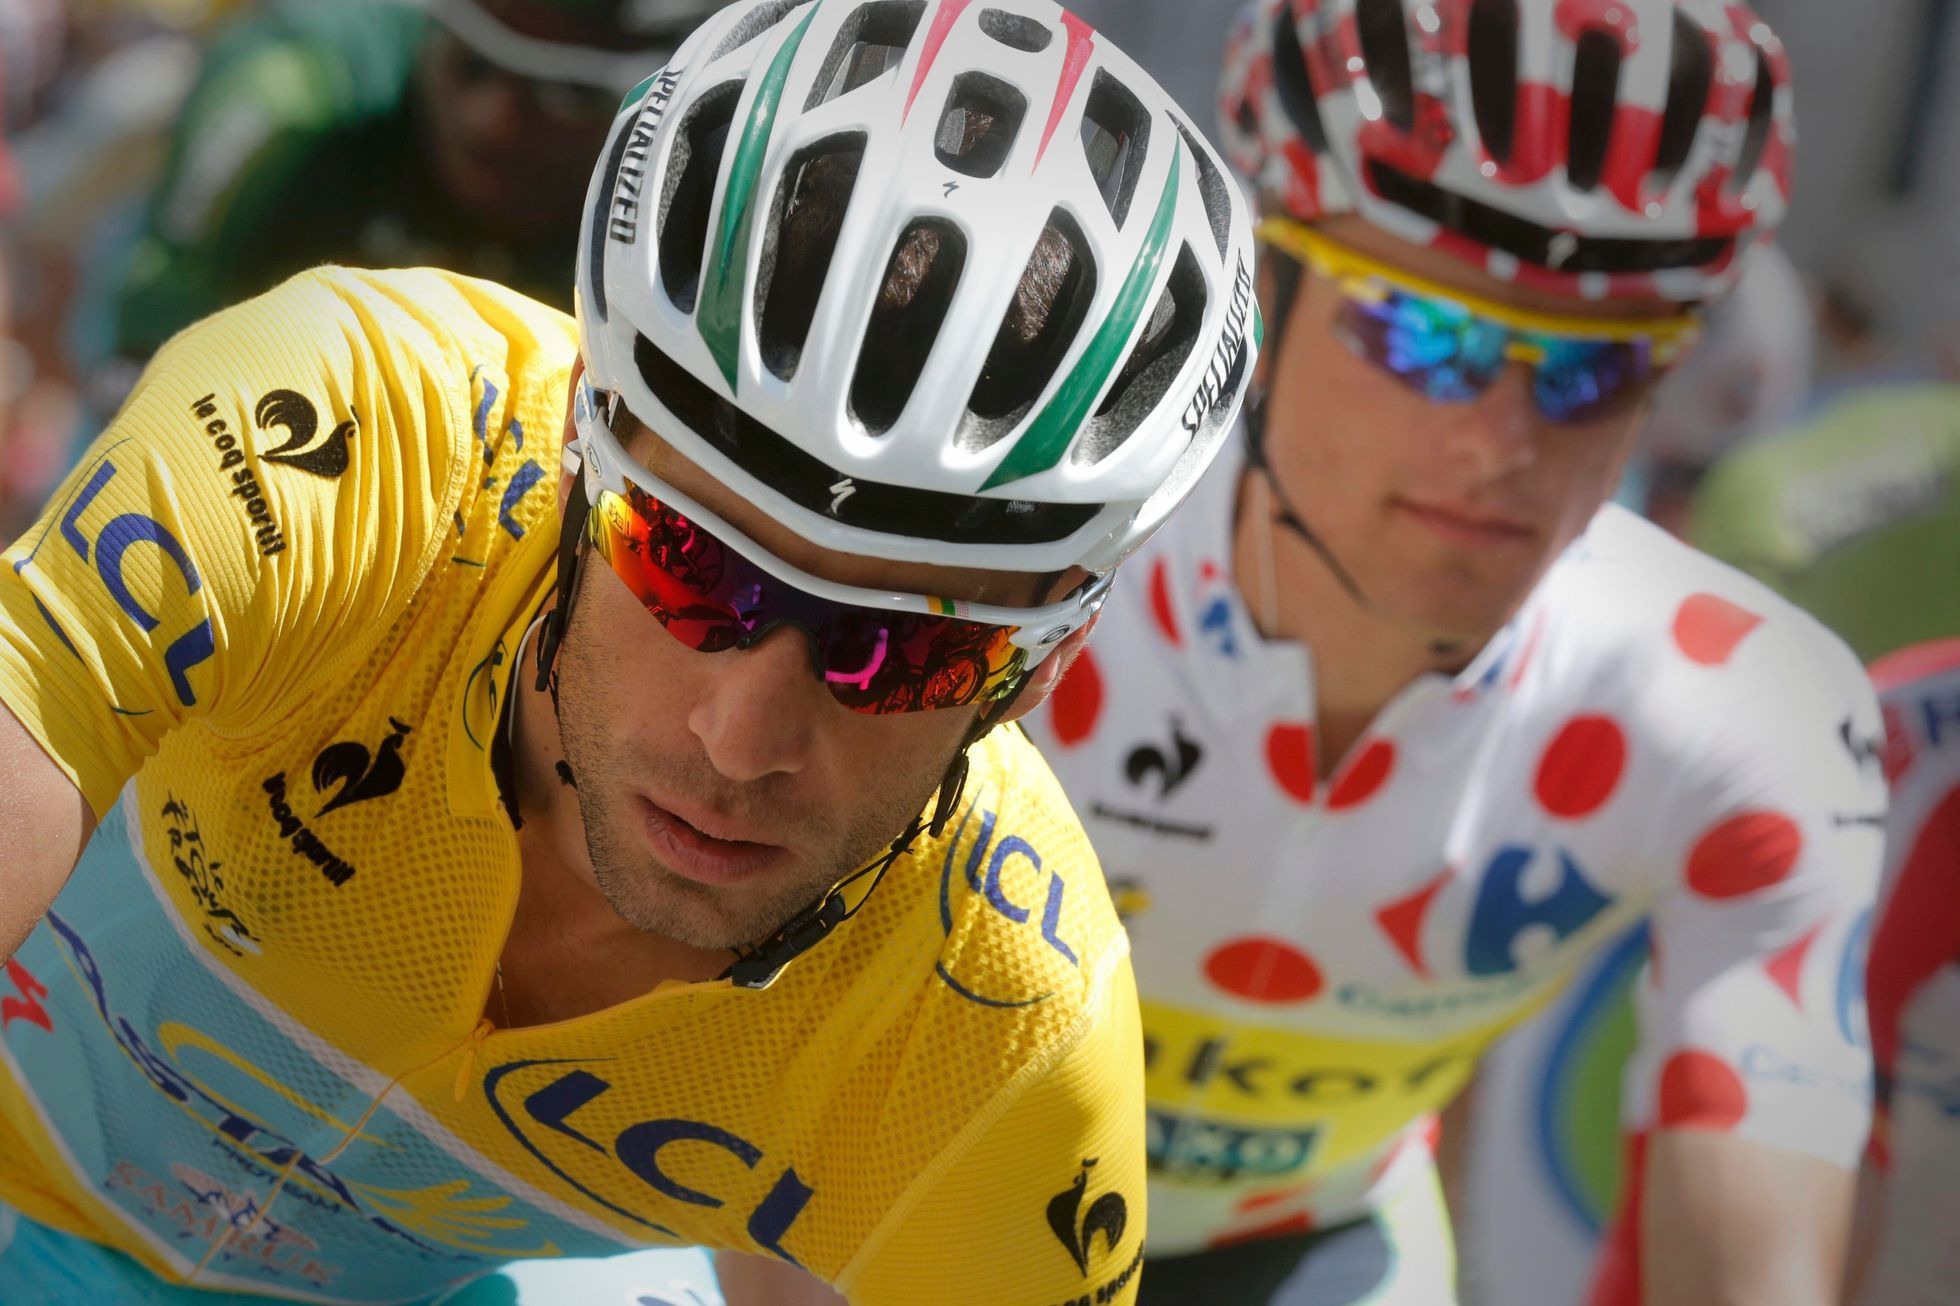 Race leader Astana team rider Nibali and best climber Tinkoff-Saxo rider Majka compete in the 17th stage of the Tour de France cycle race